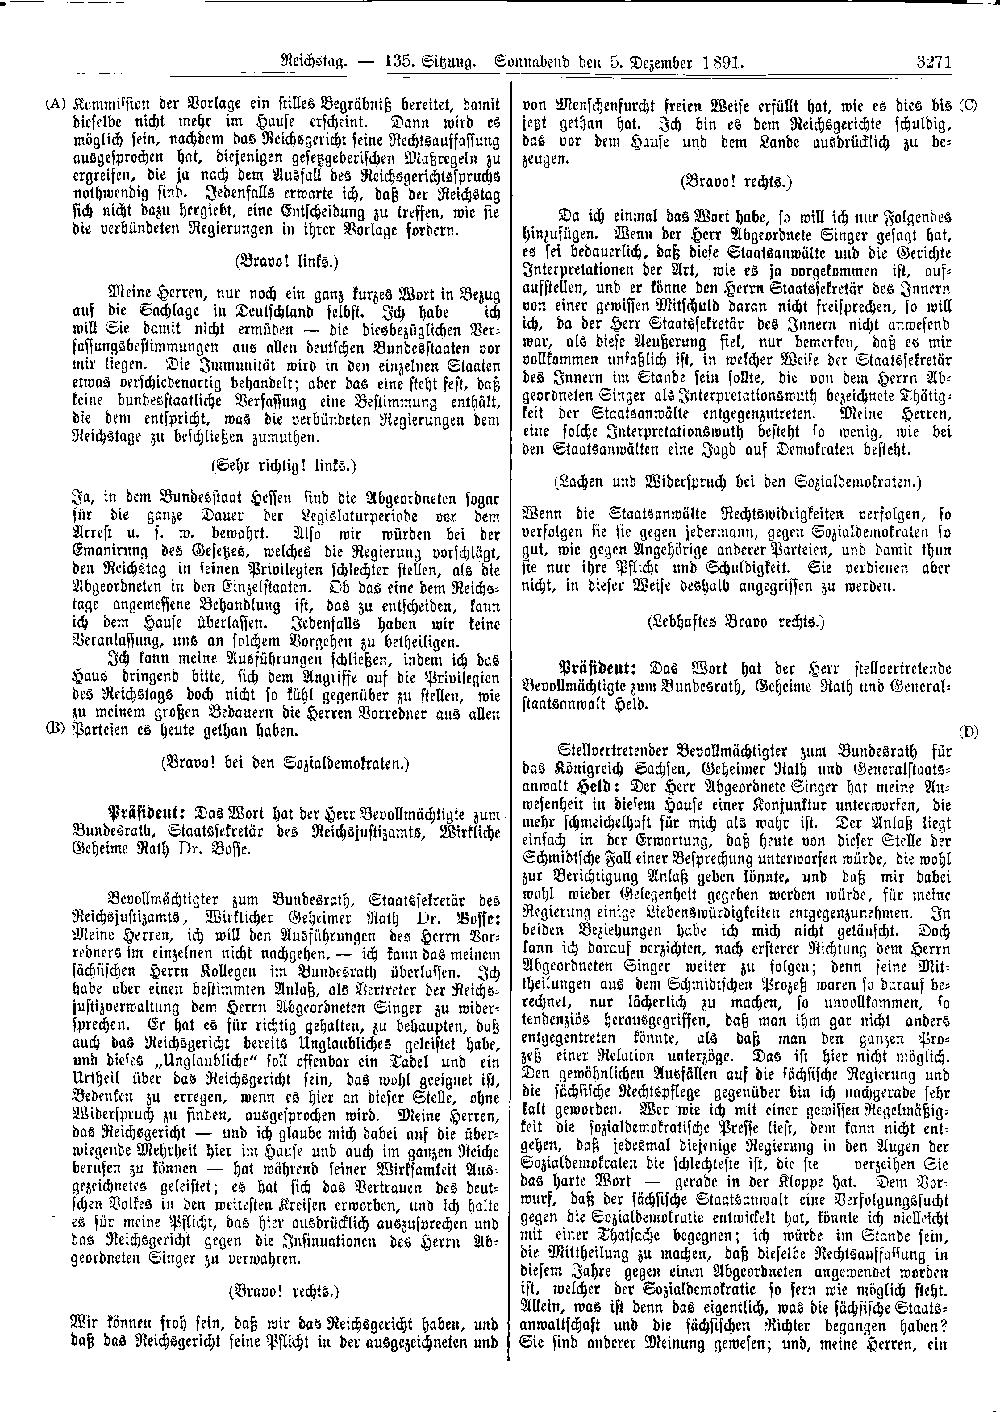 Scan of page 3271